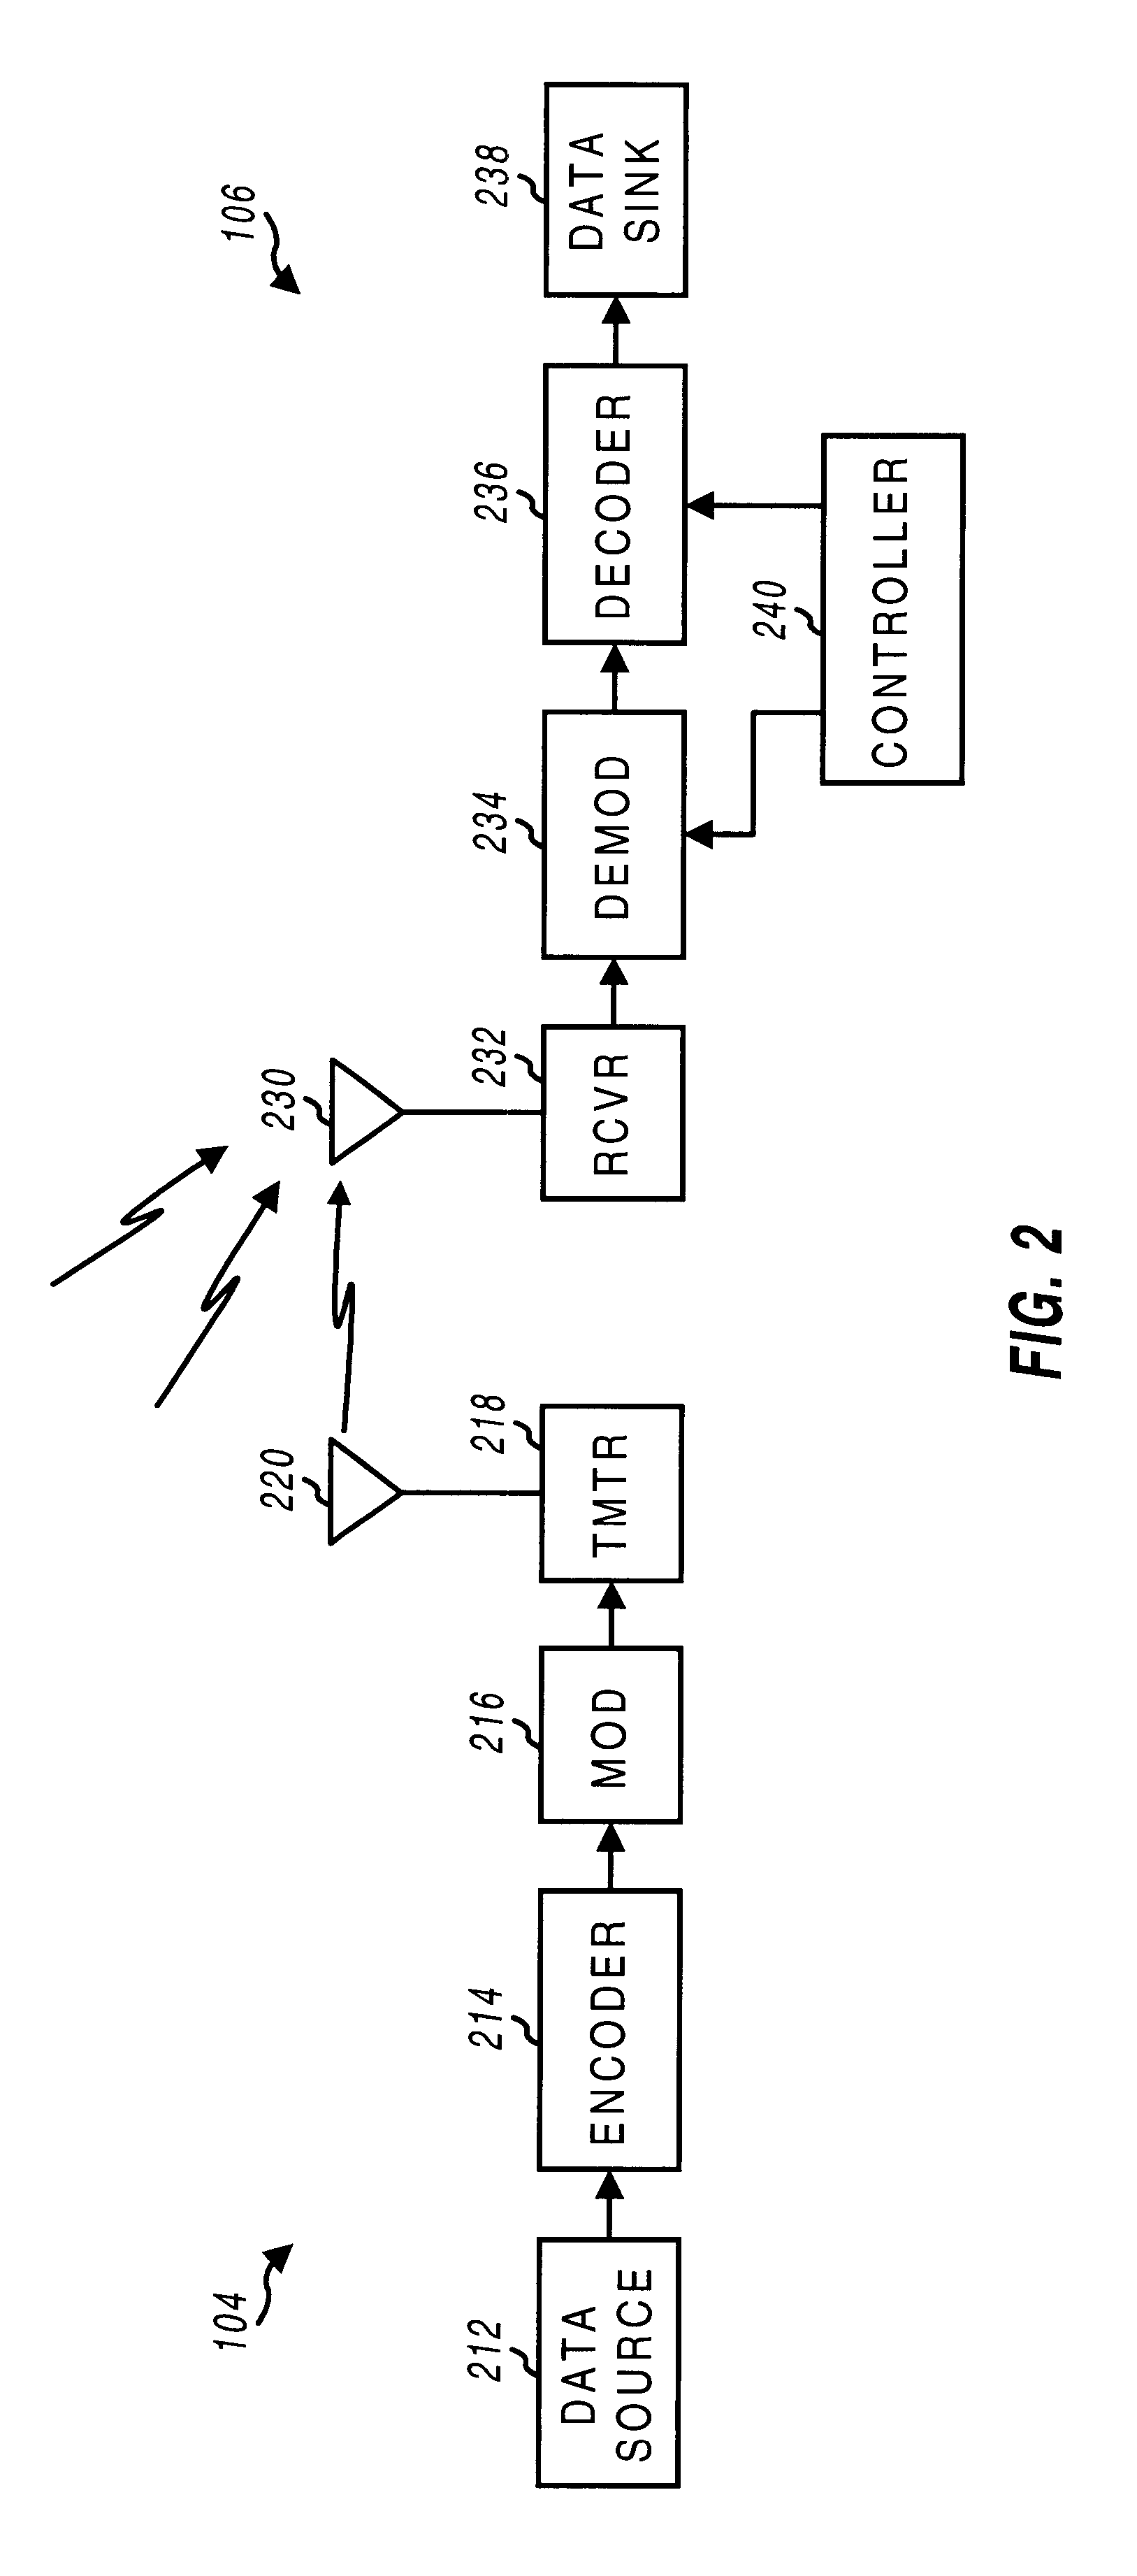 Method and apparatus for measuring timing of signals received from multiple base stations in a CDMA communication system